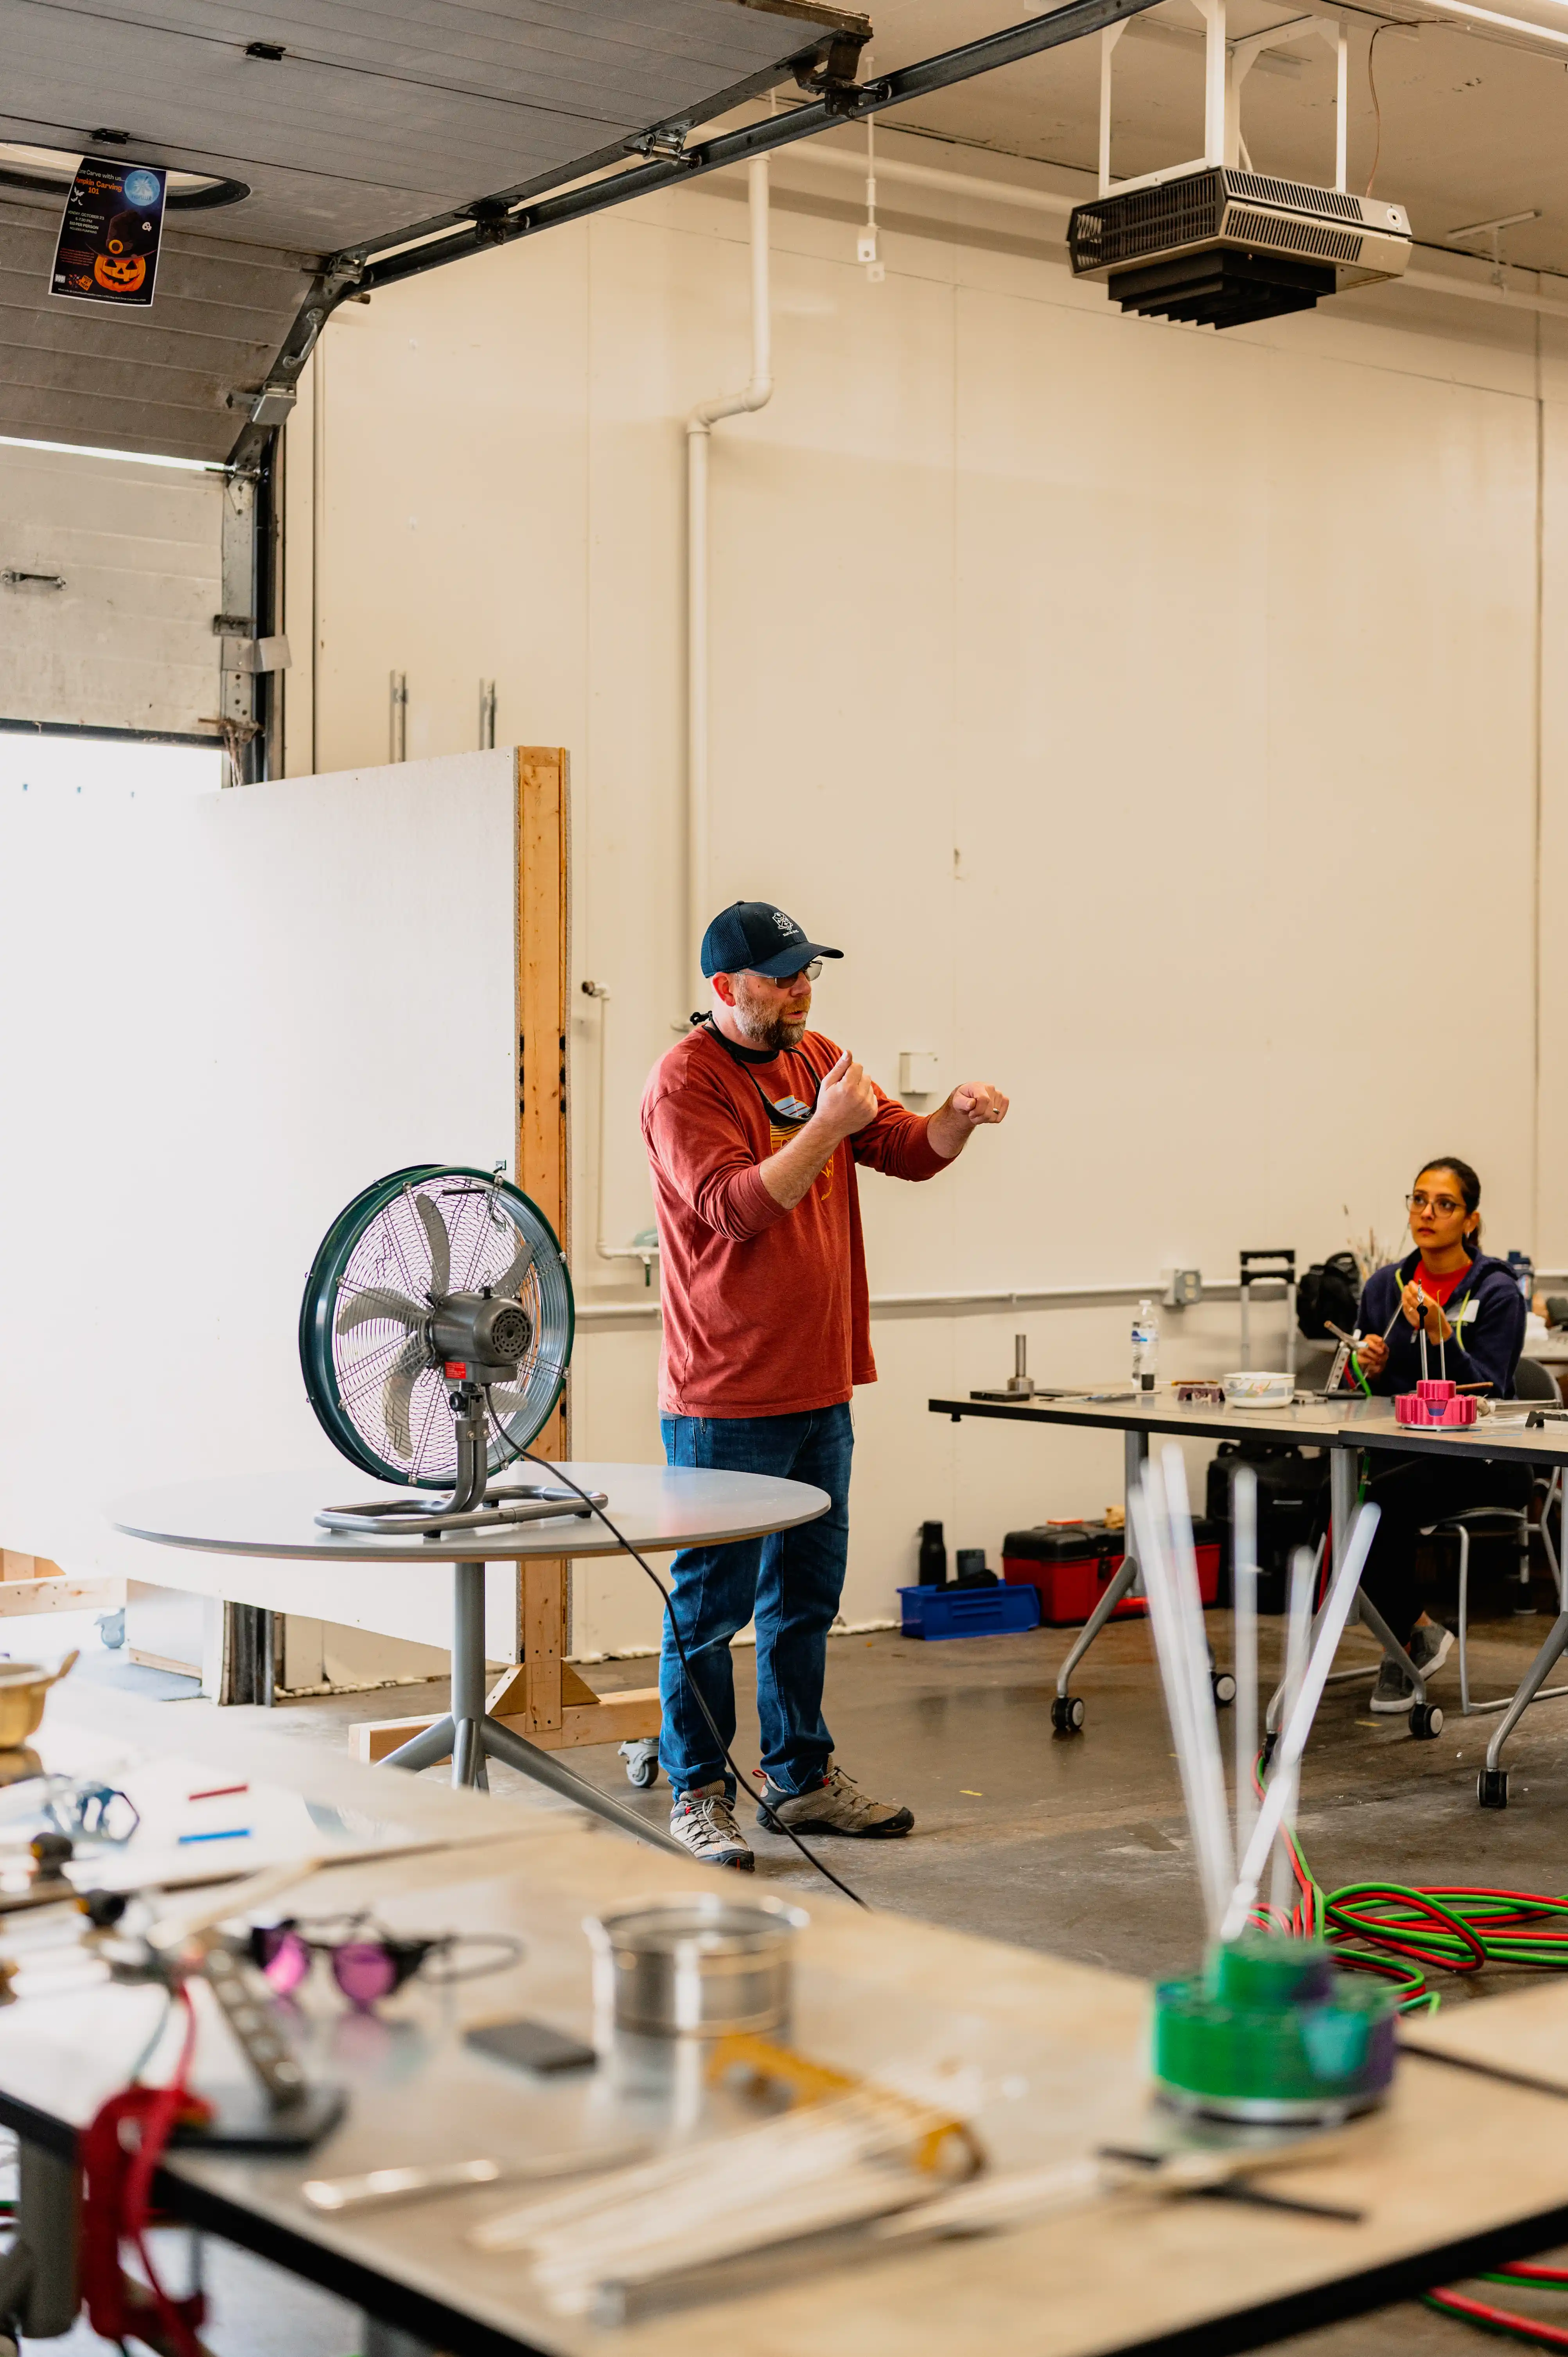 A man in a baseball cap and red sweatshirt stands speaking with a coffee cup in hand in an industrial workshop, while a woman seated at a workbench focuses on an electronic device.